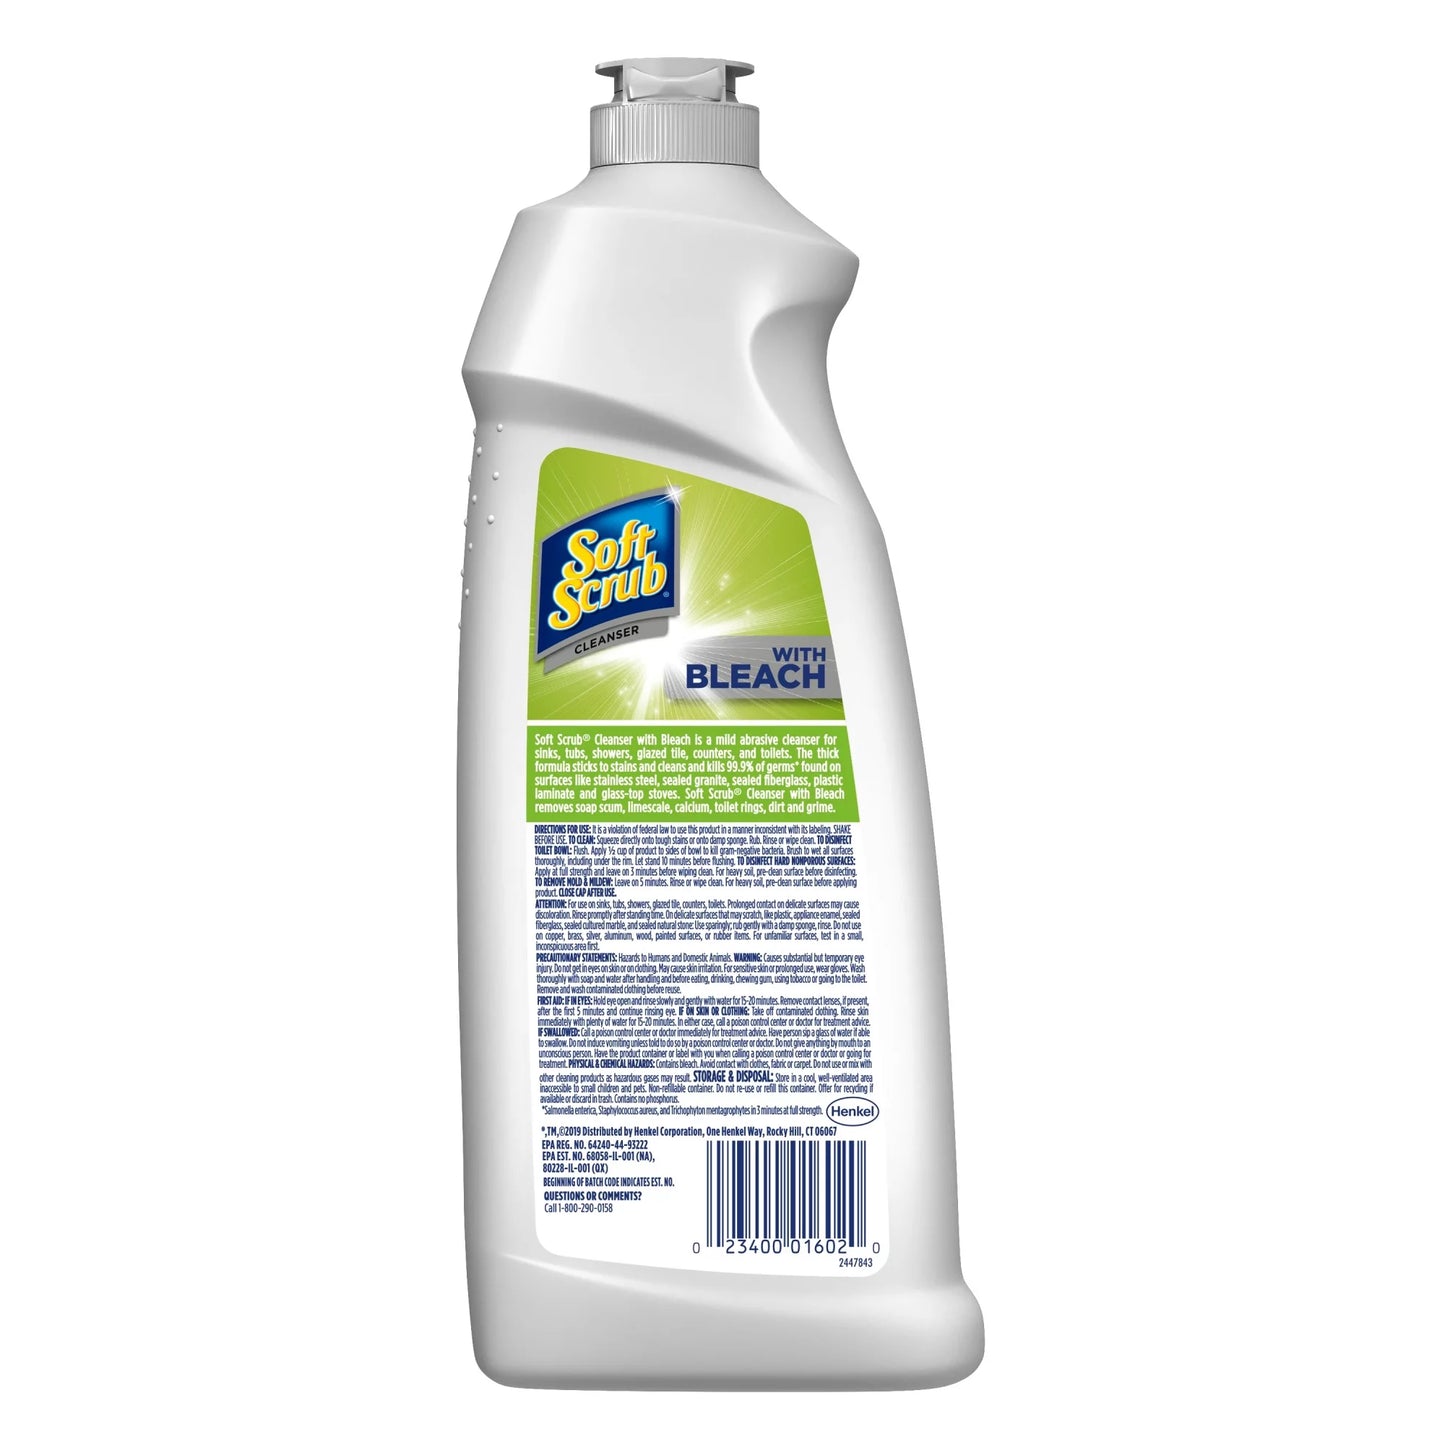 Soft Scrub Antibacterial Cleaner with Bleach Surface Cleanser, 24 Fluid Ounces